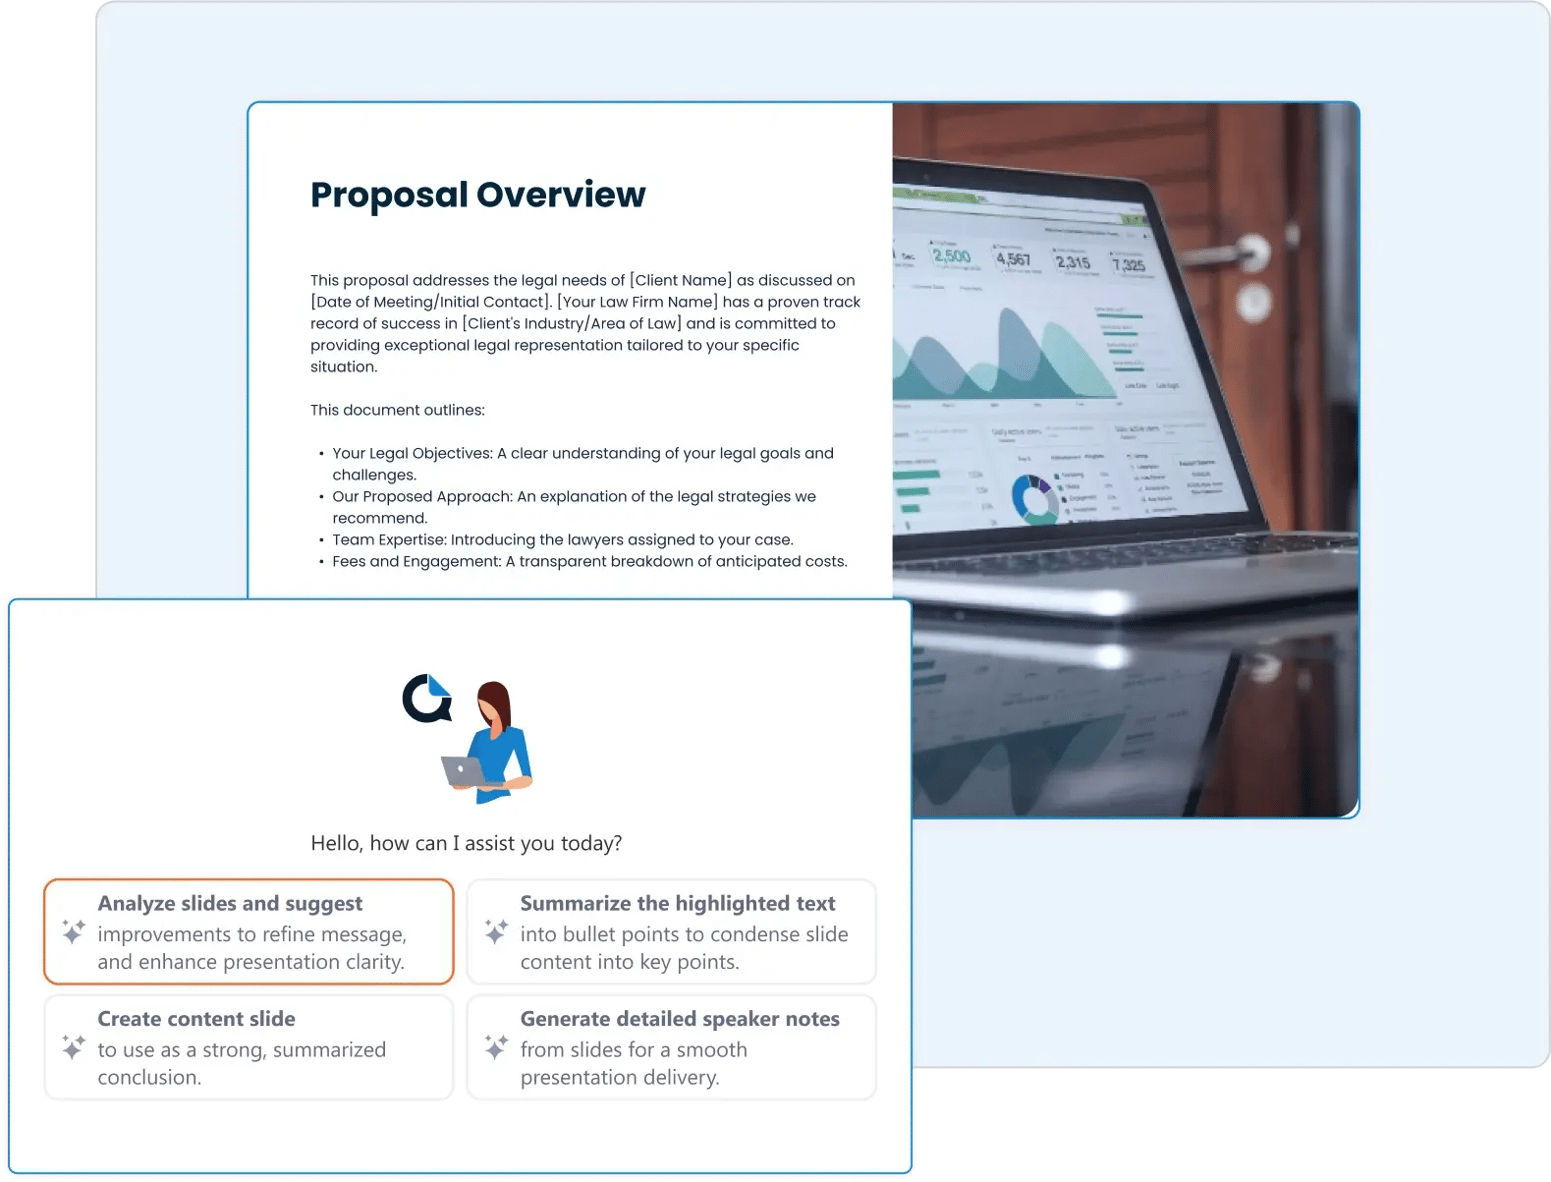 Use prompts to easily assemble presentations